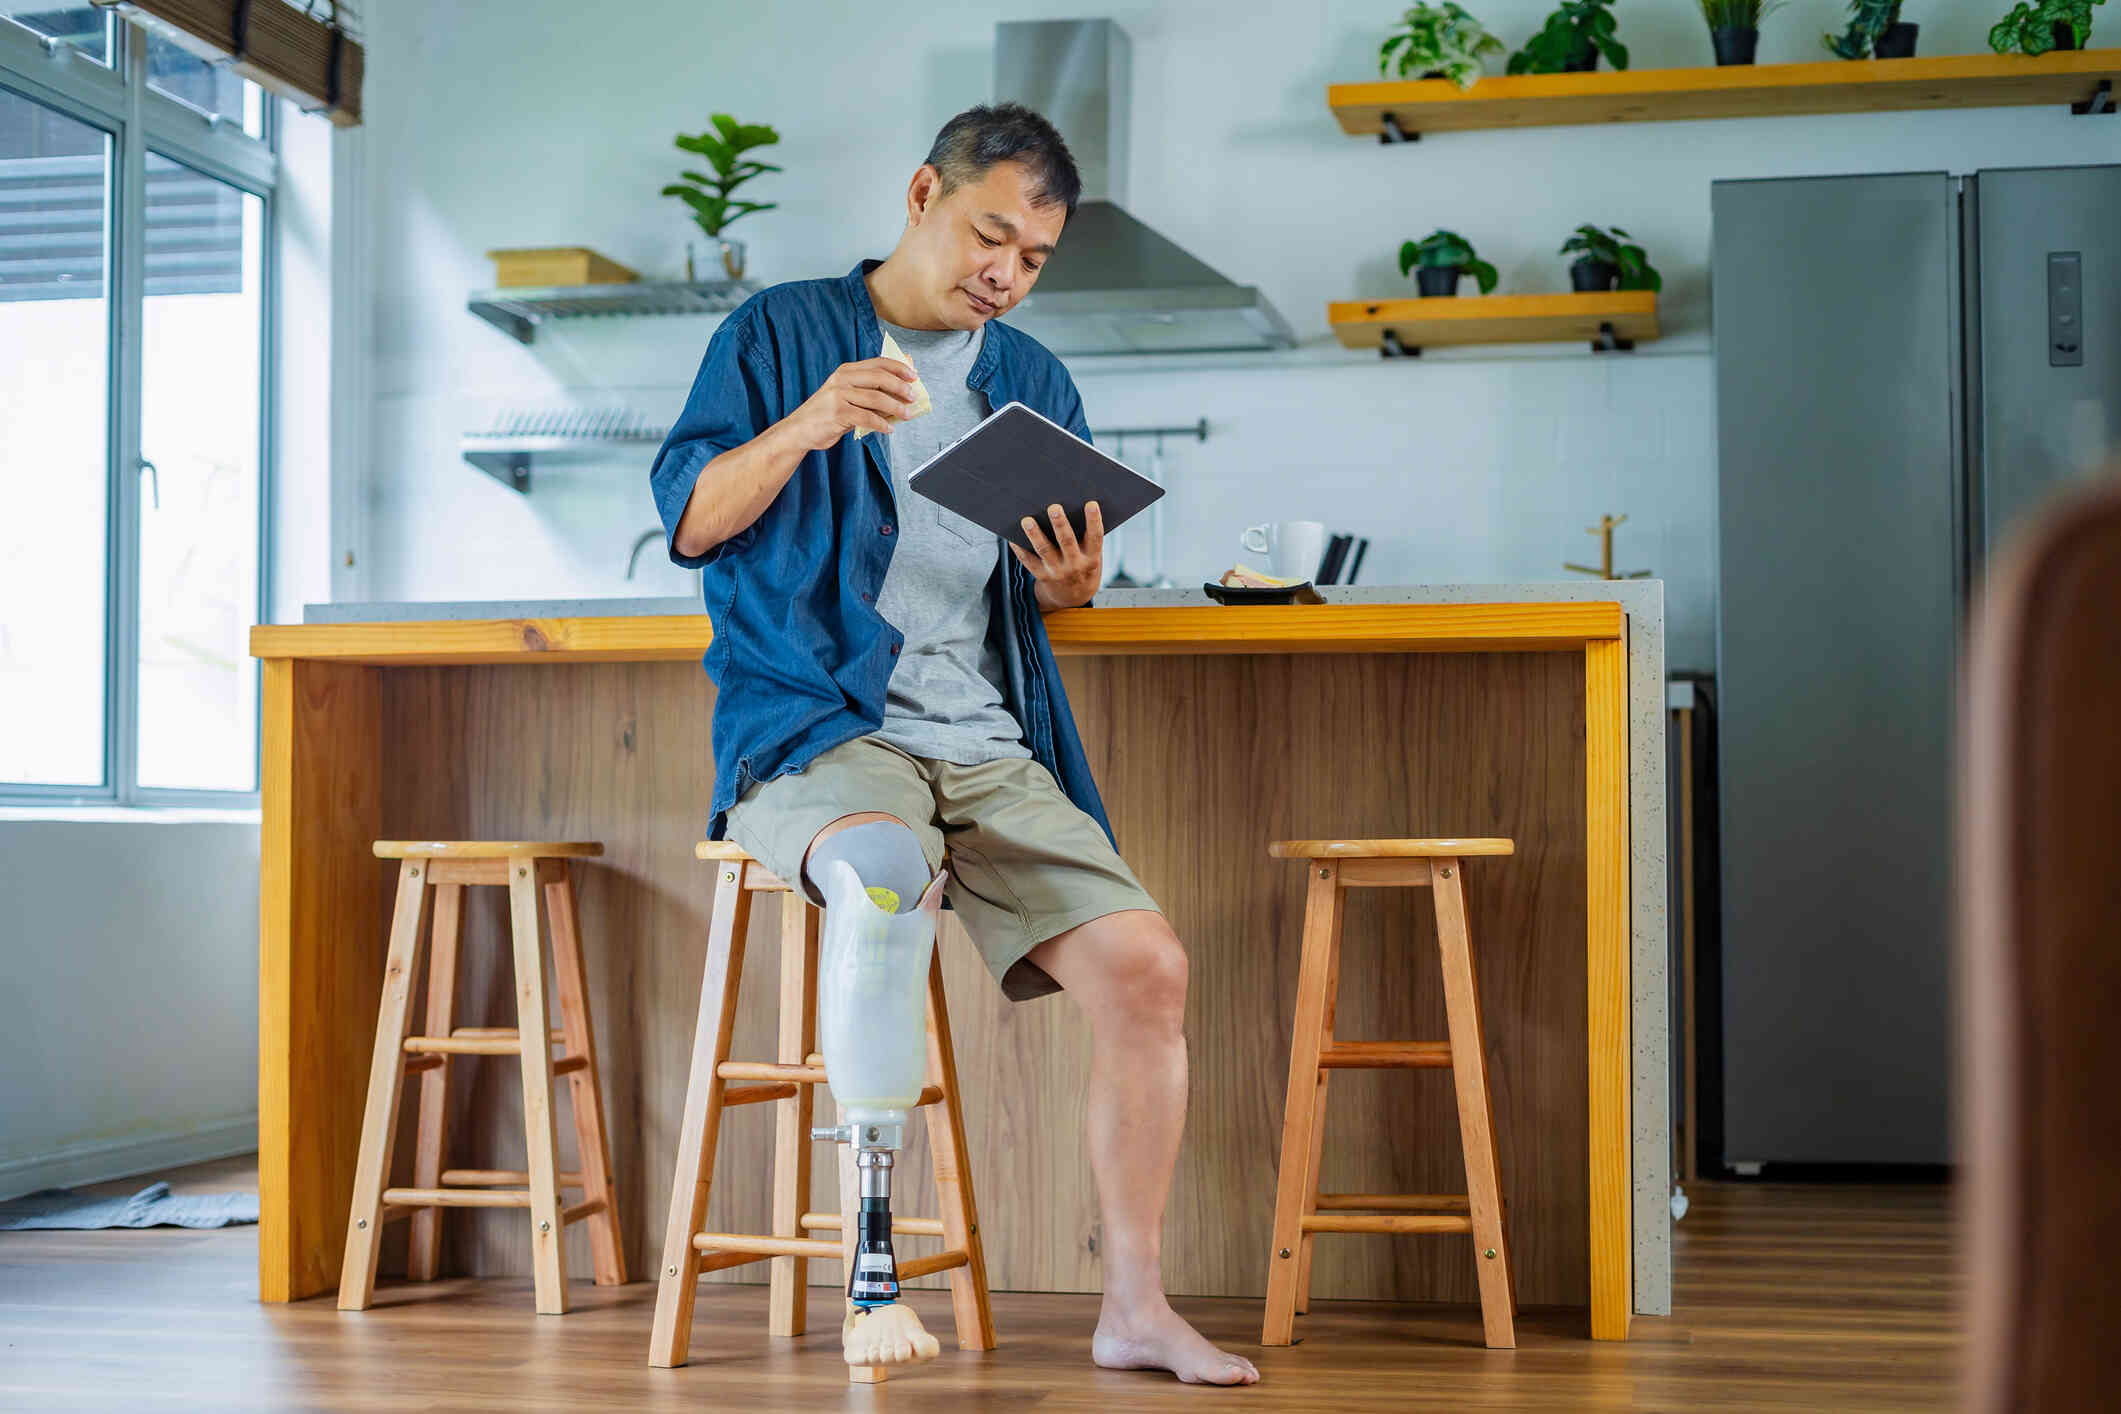 A man with a prosthetic leg sits on a stool at the breakfast bar in his home and holds a sandwhich in one hand while looking at the tablet in the other.